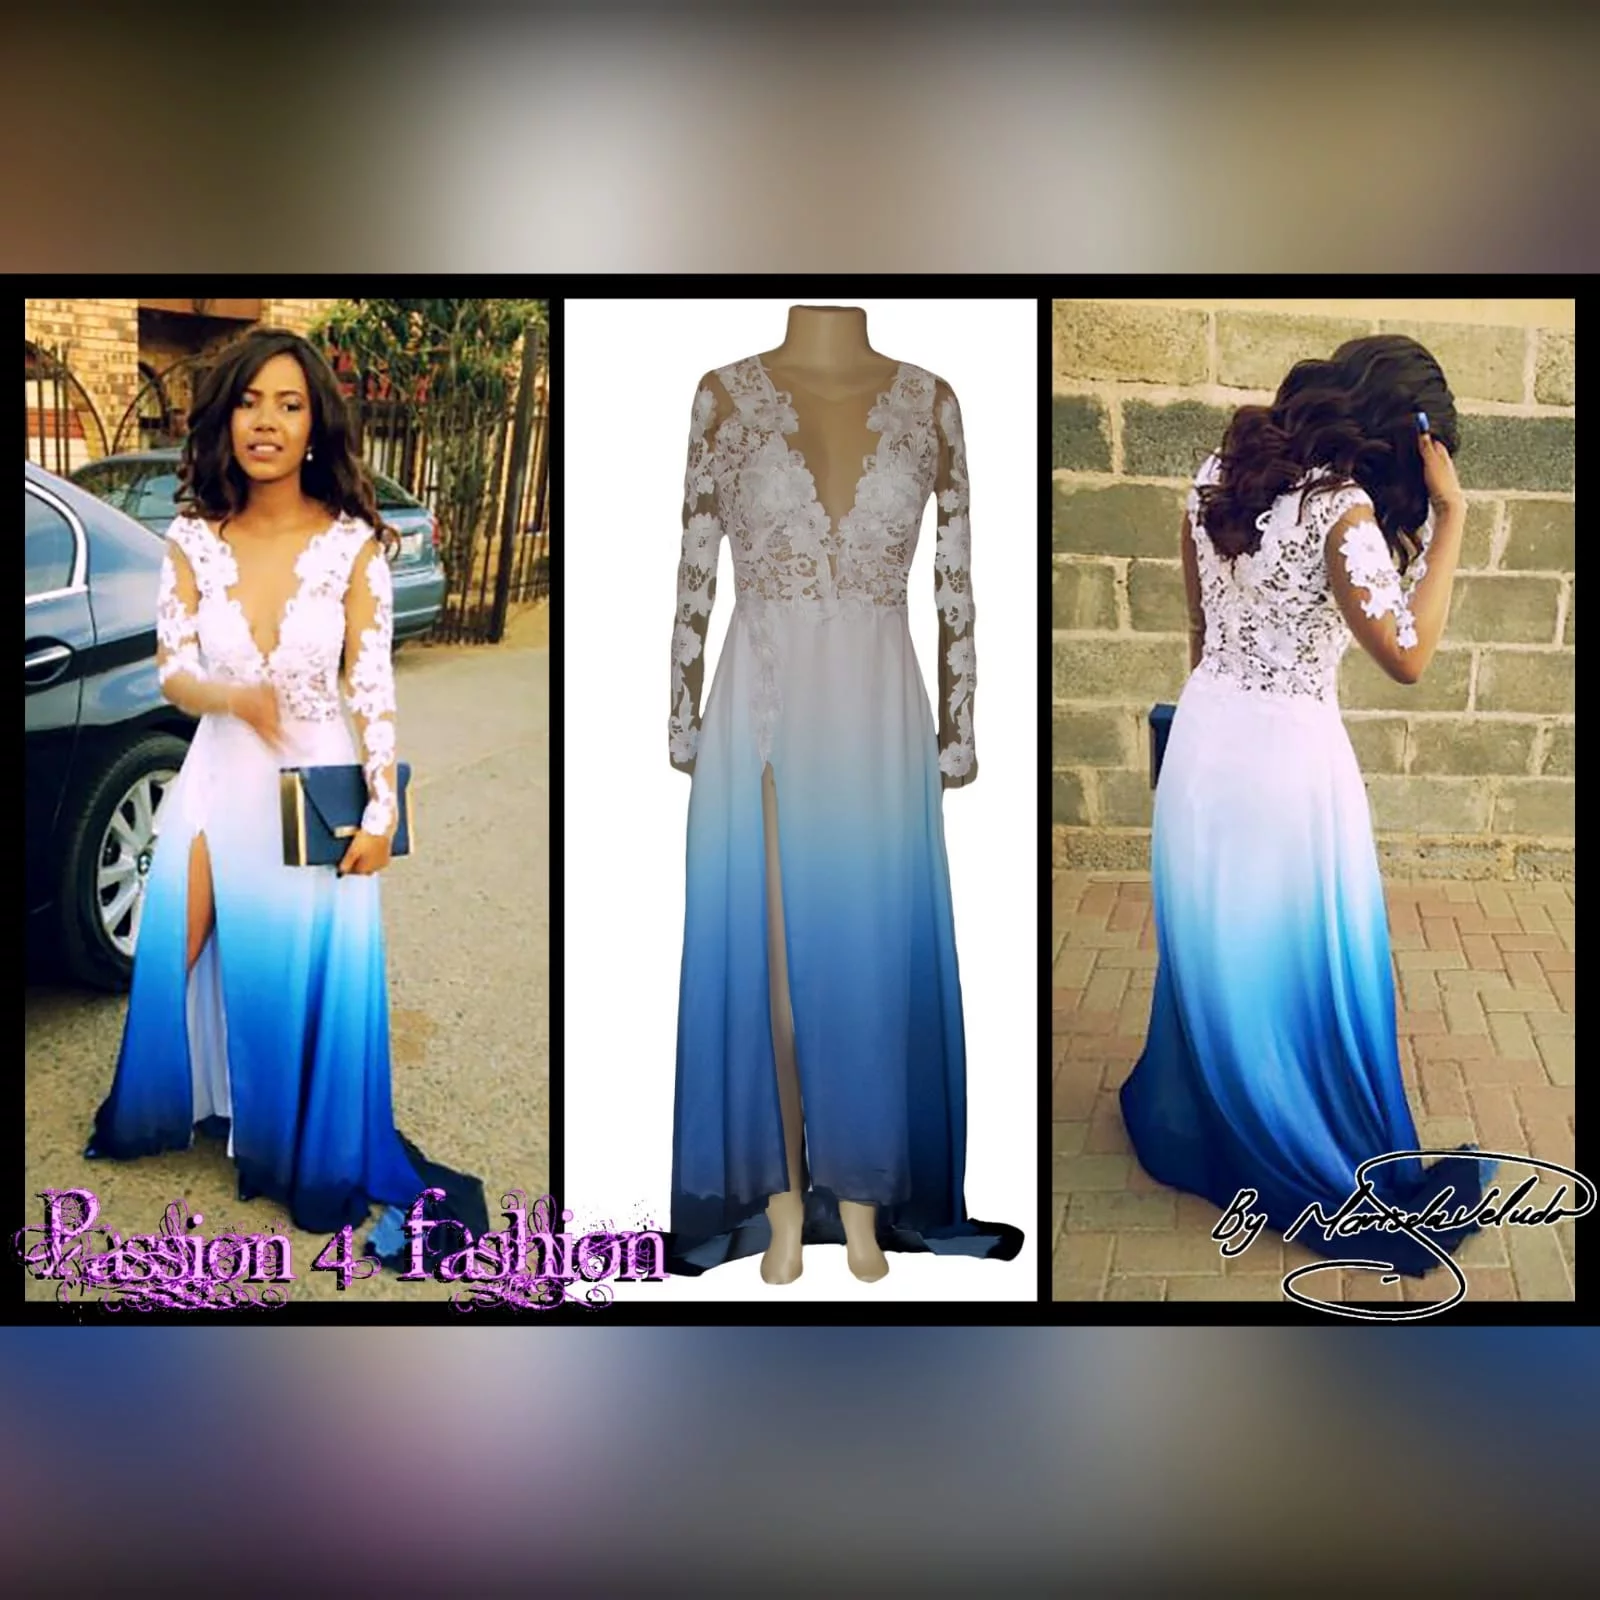 Gorgeous blue and white ombre flowy ceremony dress 3 a gorgeous blue and white ombre flowy ceremony dress created for a prom night. With a classy white bodice with elegant illusion lace sleeves. With a slit and a train